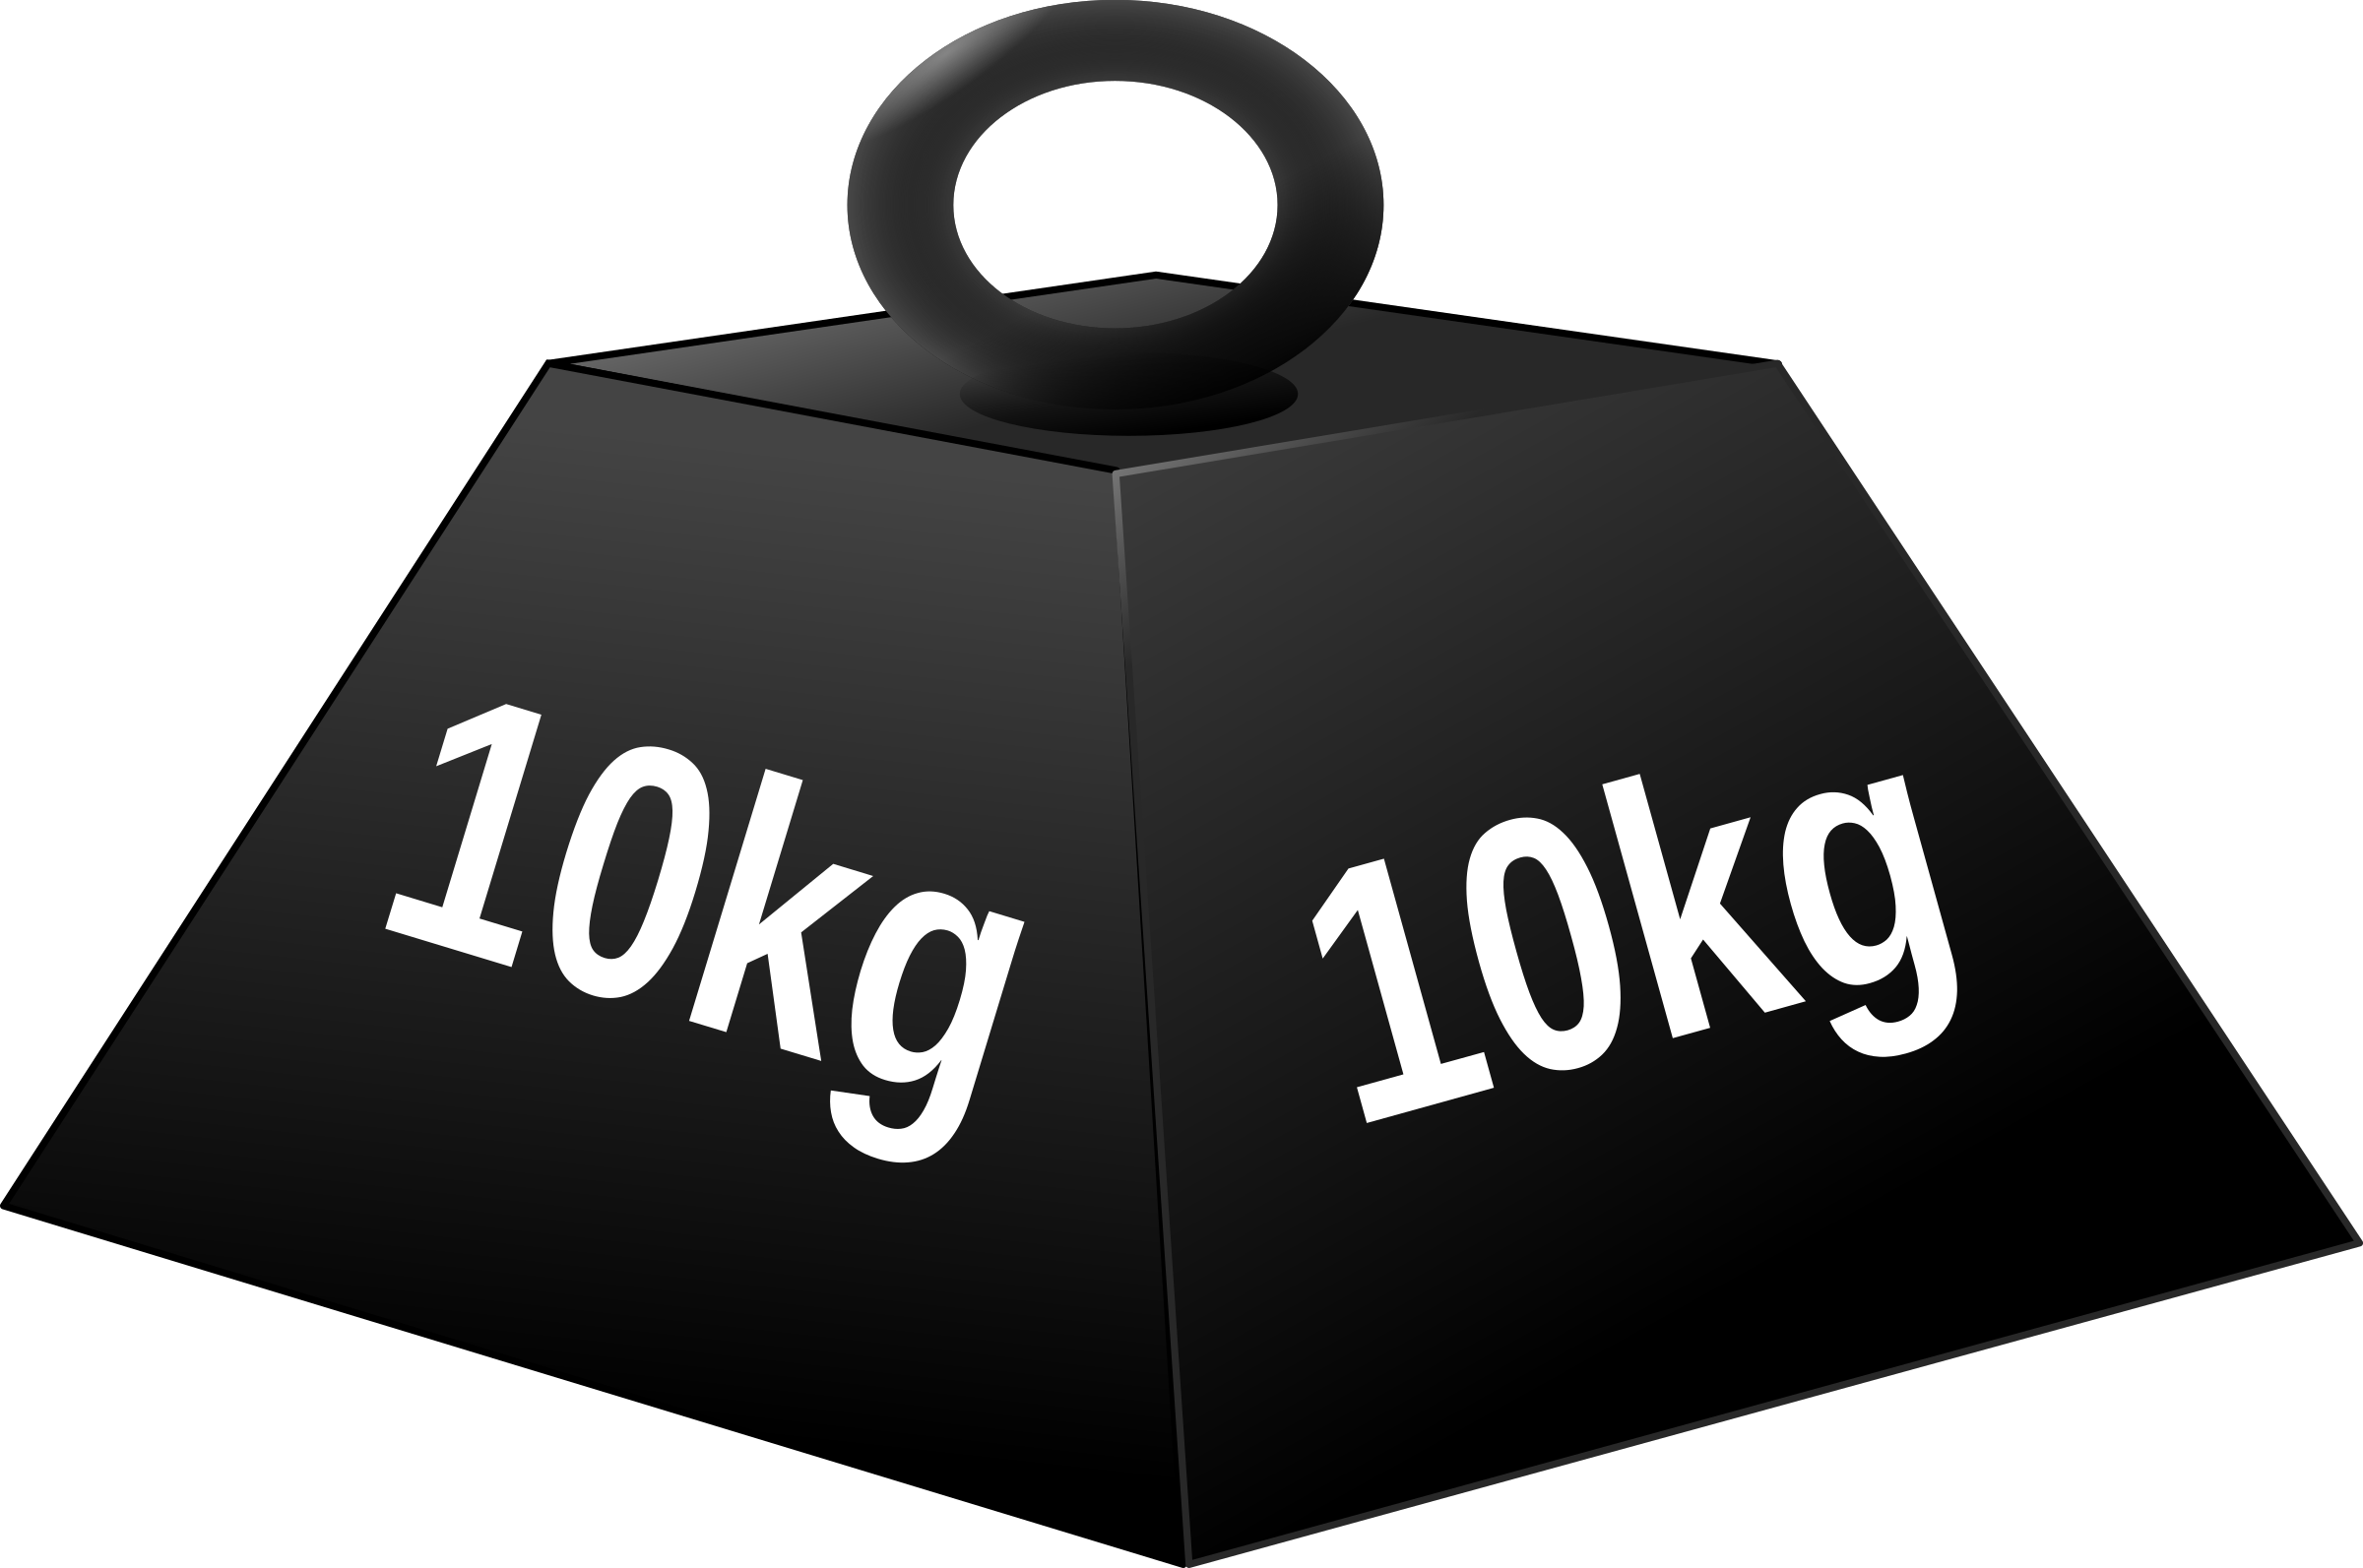 Kg character big image. Weight clipart black and white